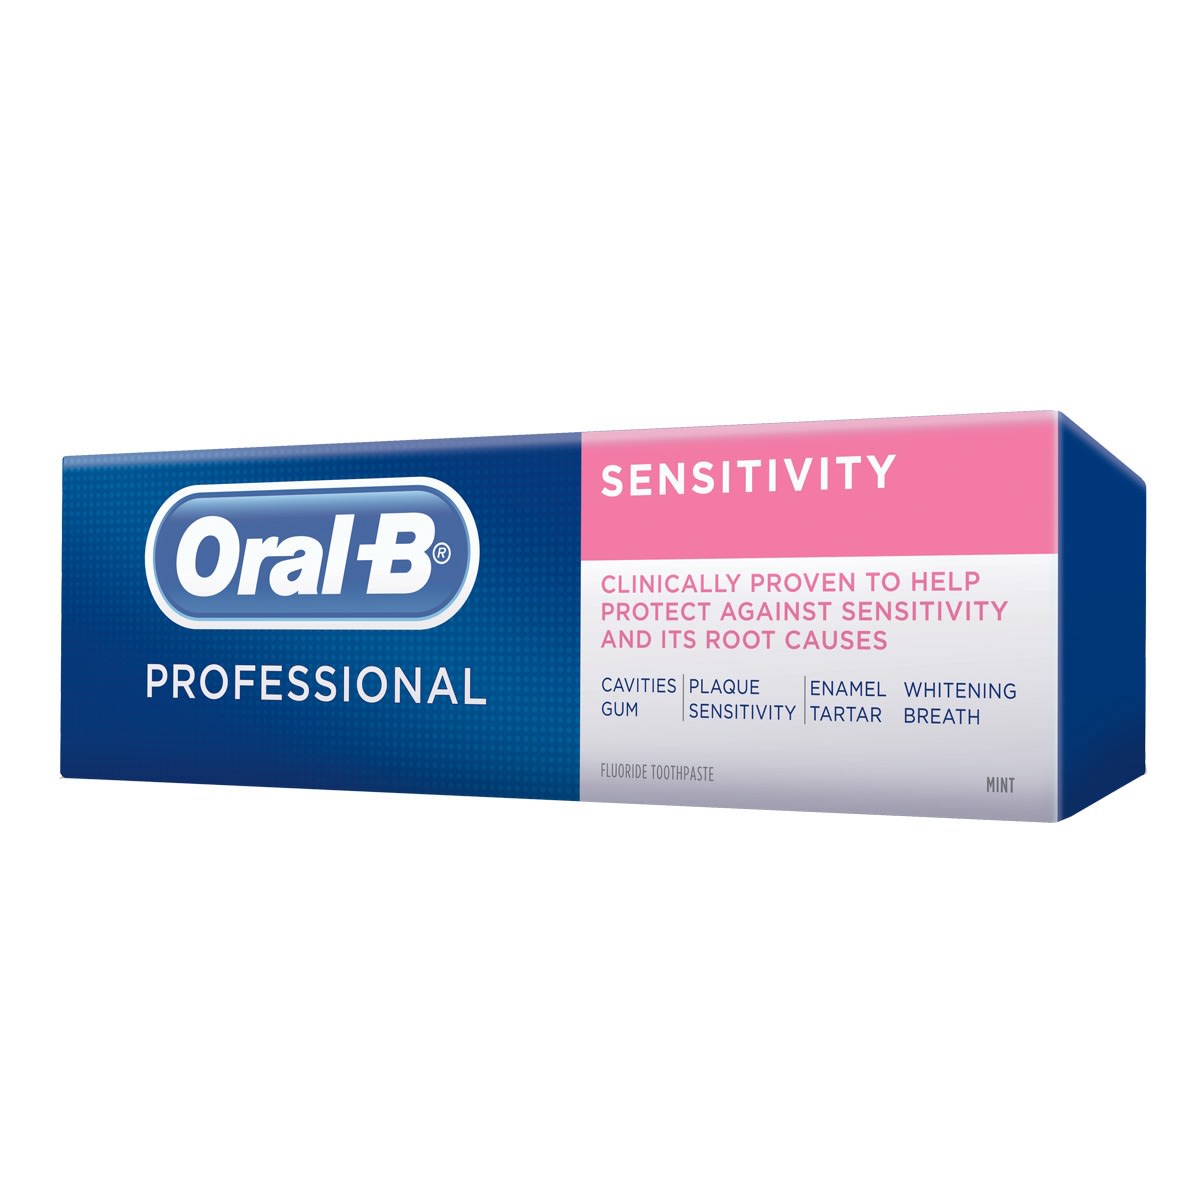 Panda correct jeans Oral-B Pro-Expert Professional Sensitive toothpaste | Oral-B